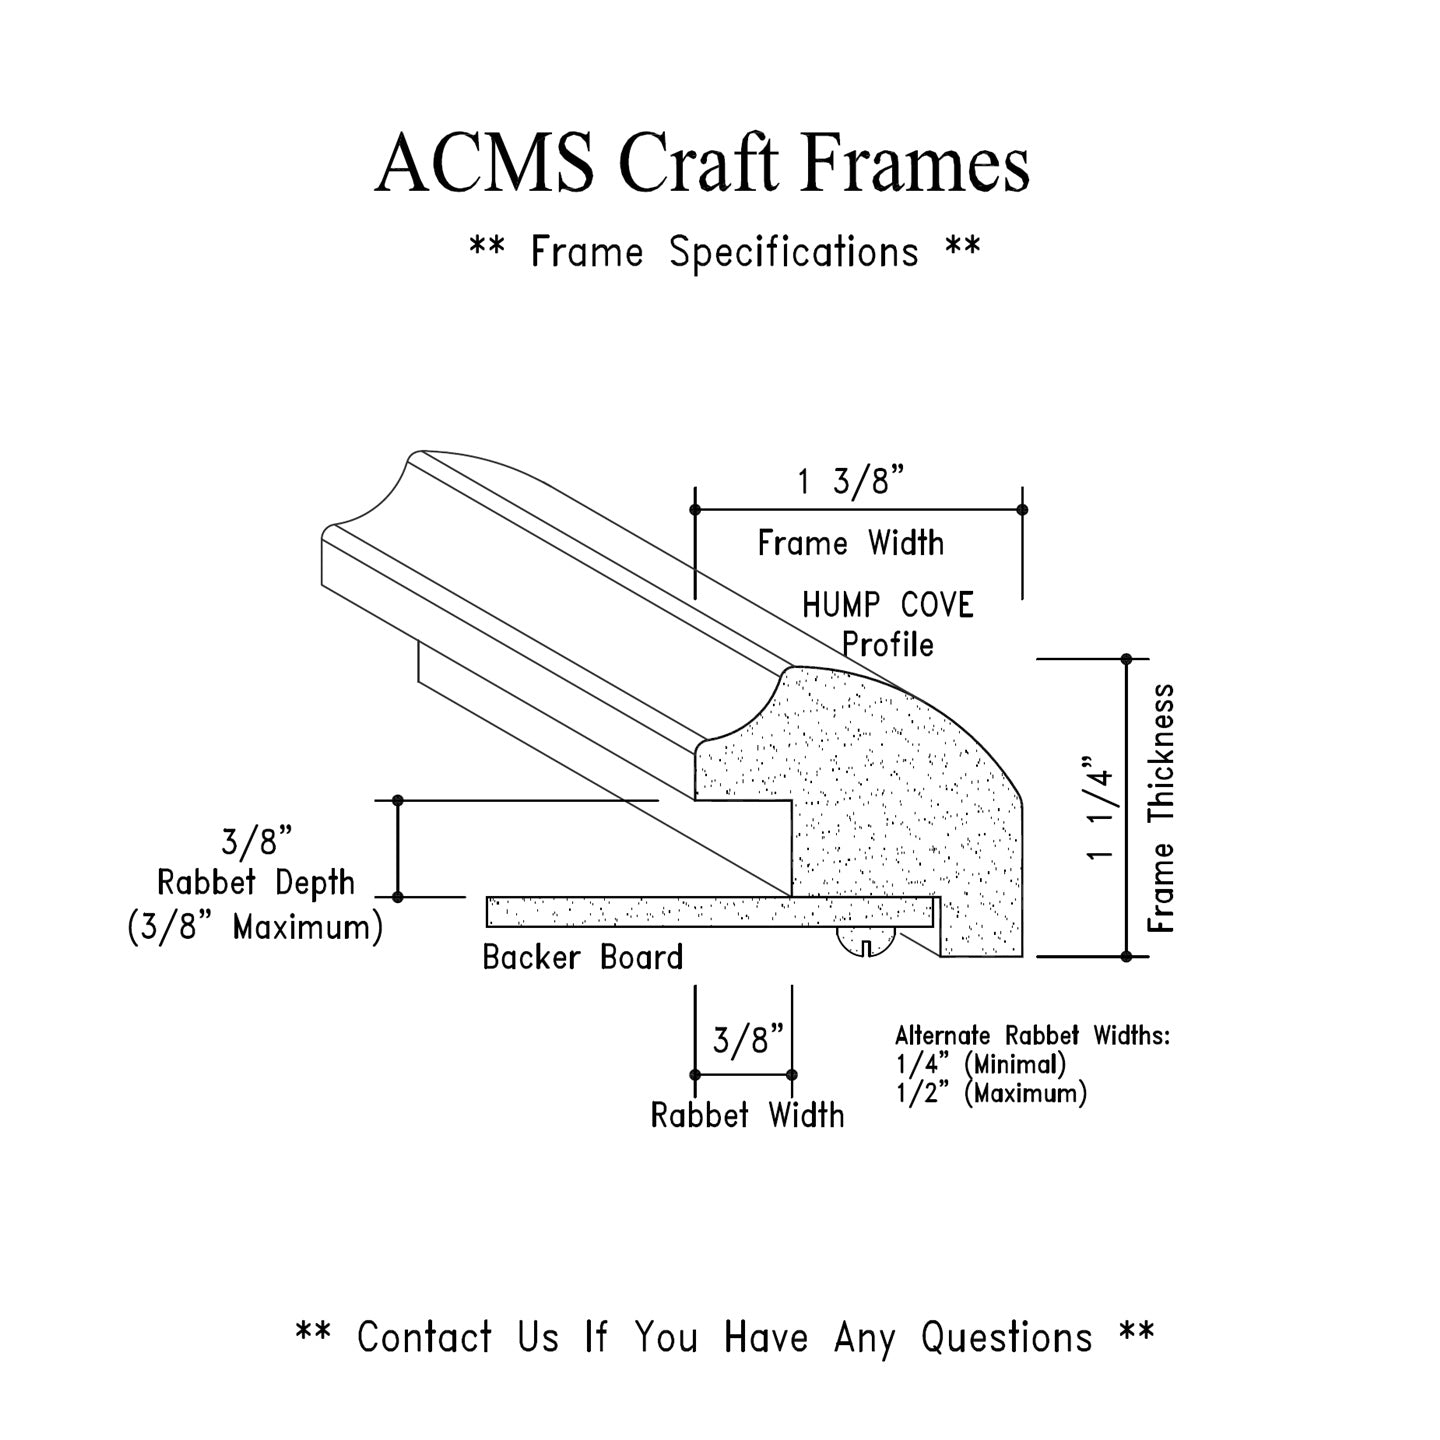 Round Craft Frame - 1 1/4" Thick - 1 3/8" HUMP COVE Profile